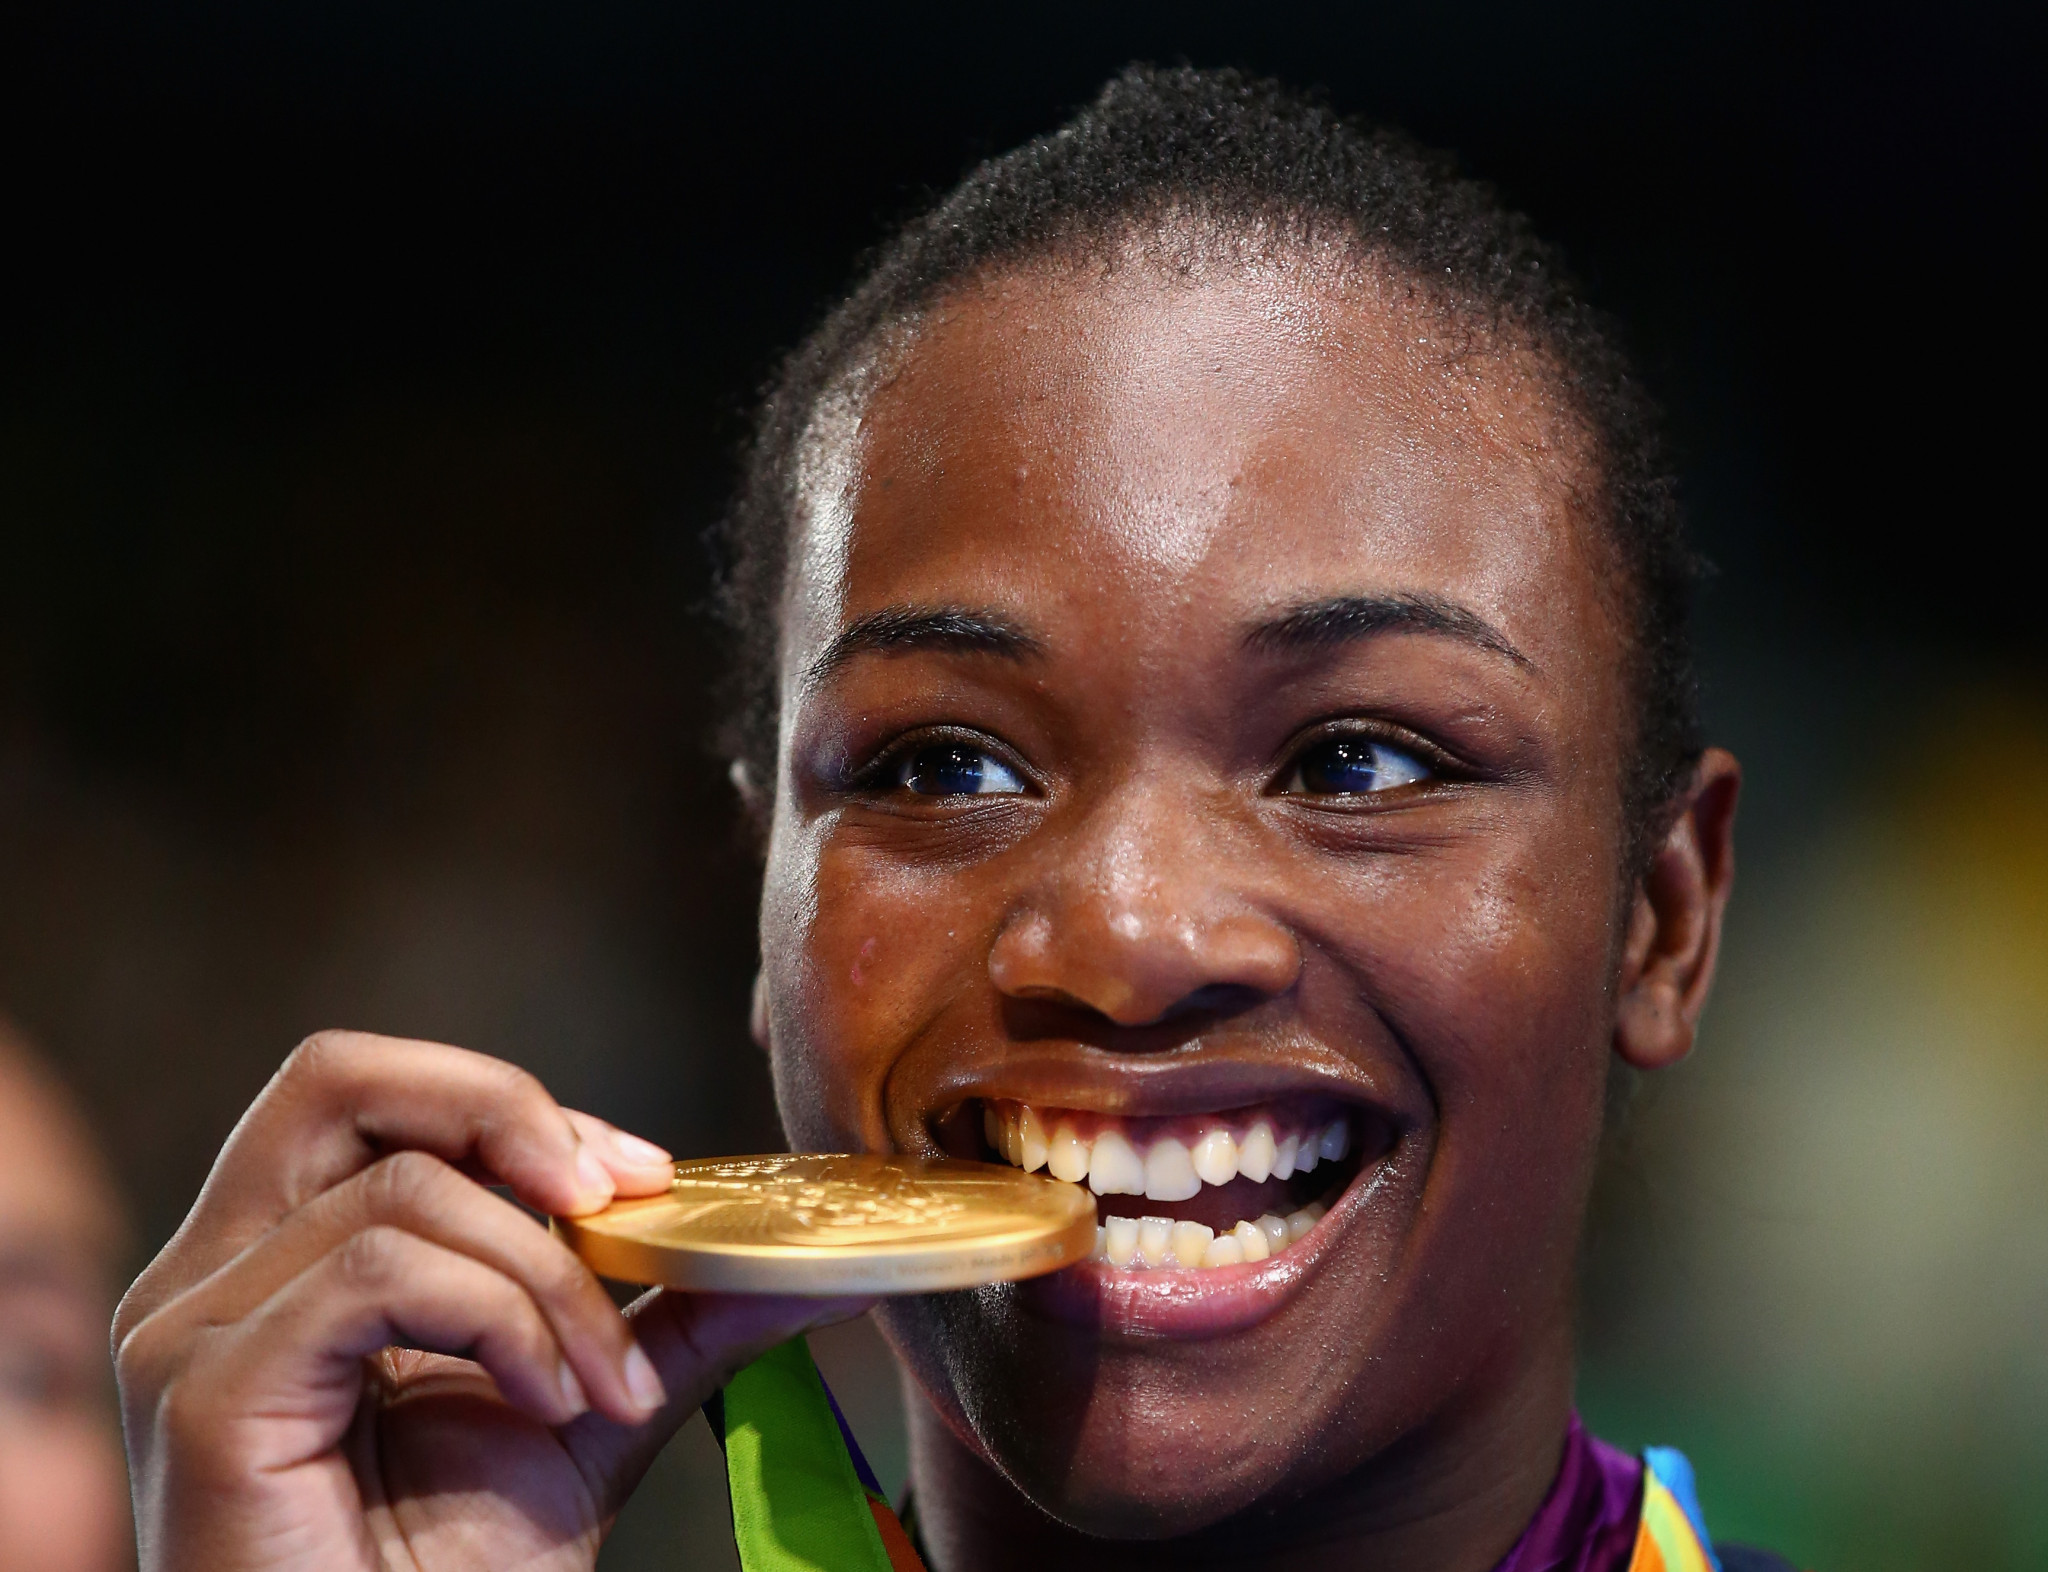 Two-time Olympic boxing champion Claressa Shields will act as a mentor in the training camp ©Getty Images